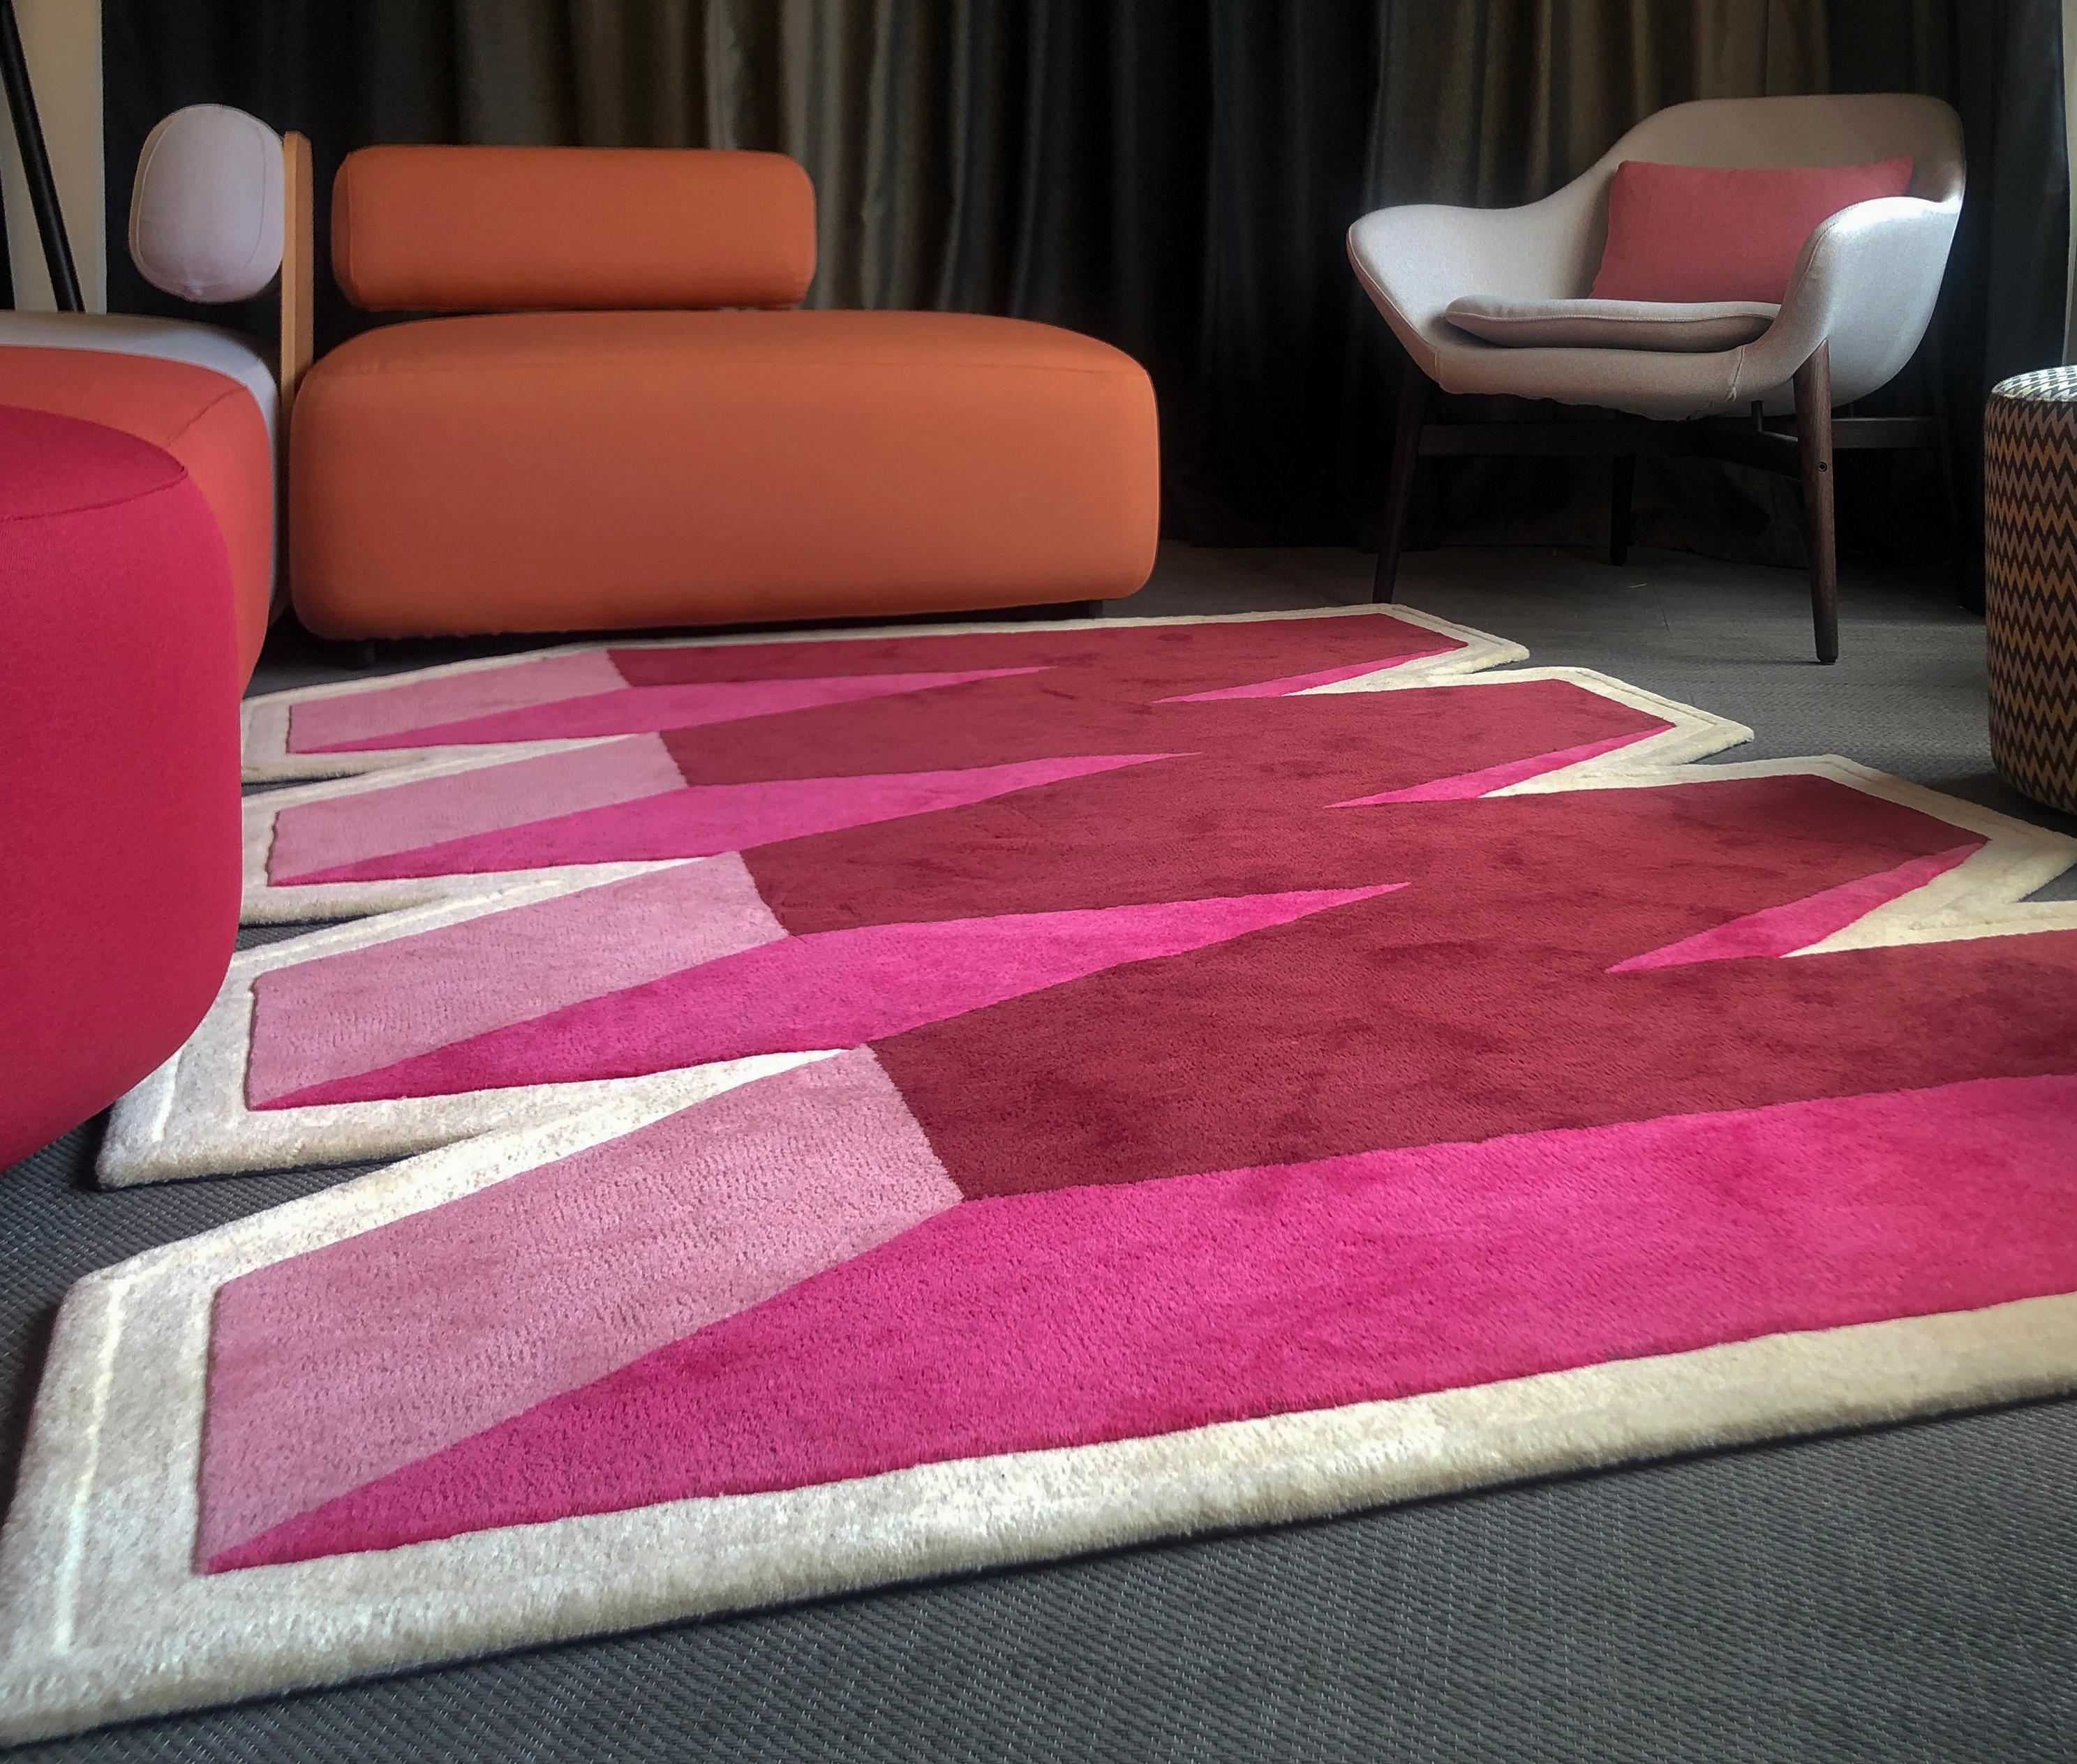 Post-Modern Down The Line Rug by Matthew Knight, Tufted, 100% New Zealand Wool 150x230cm For Sale